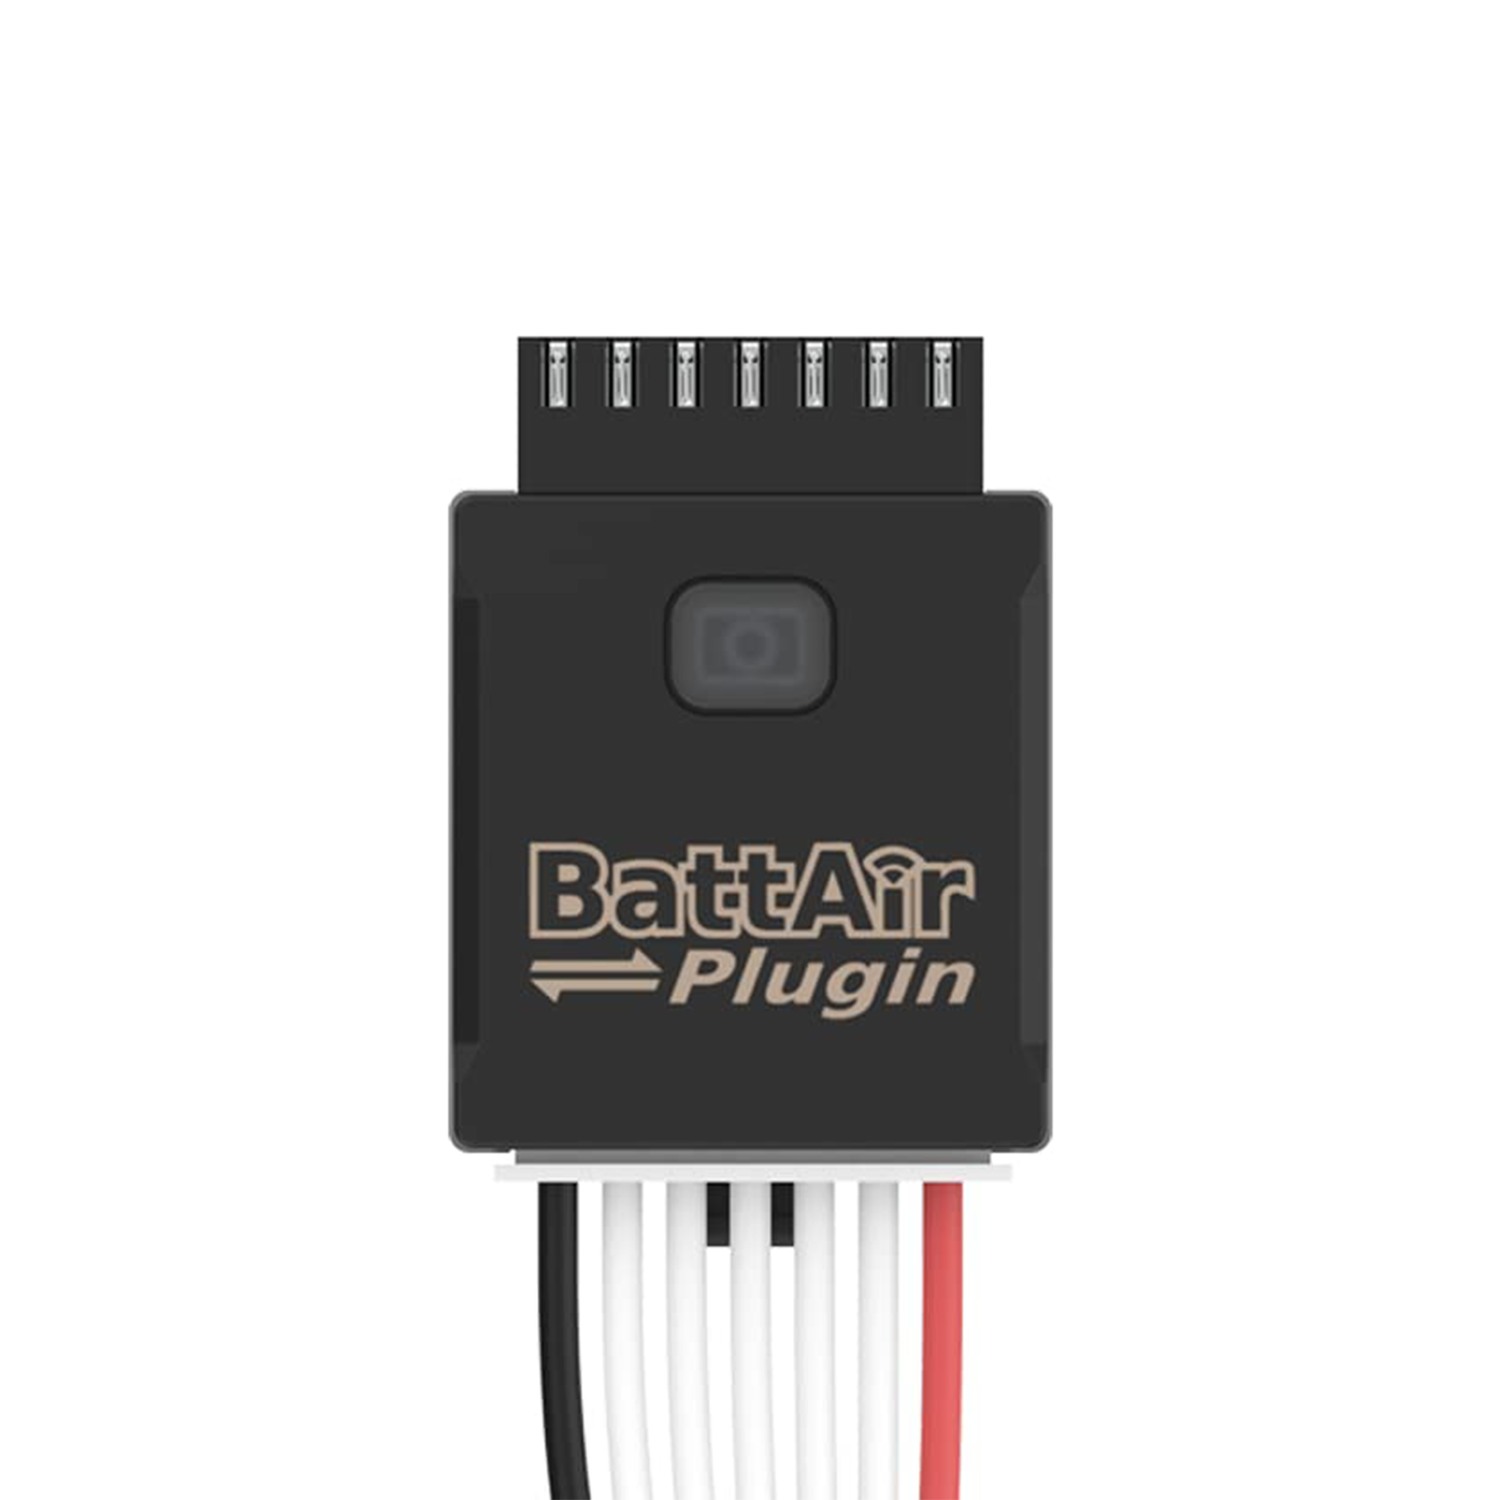 Battair Plugin, 5 Packs 2/3-4S/5-6S RC Model Accessories for Battery Guard Housekeeper Smart Battery Management System